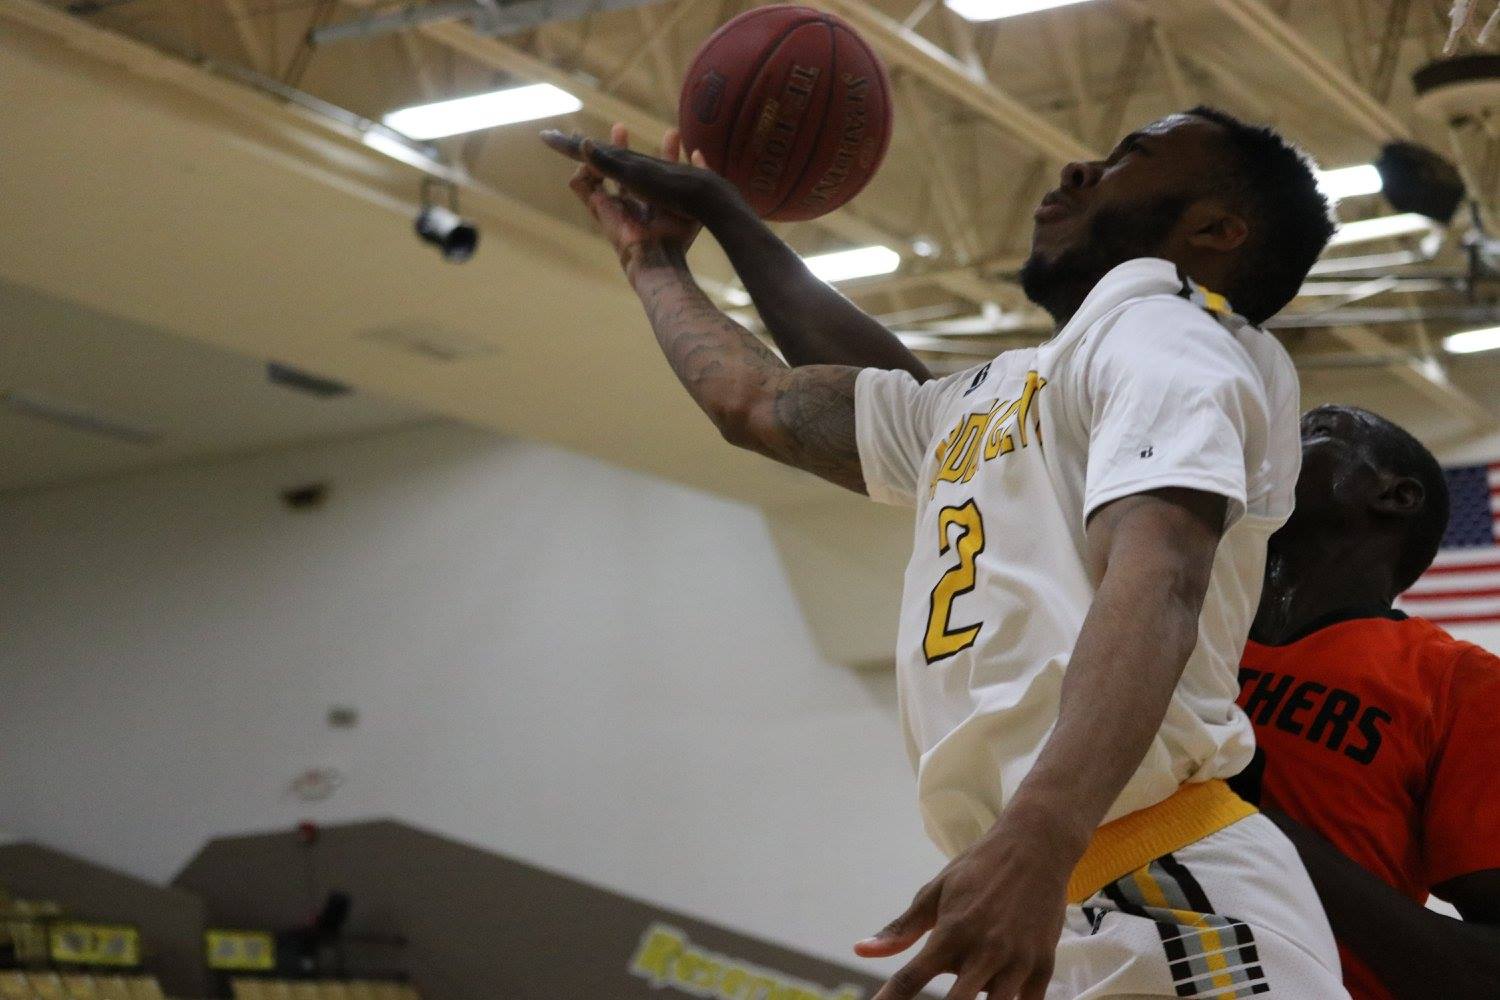 Colby's hot shooting too much for Broncbusters to overcome